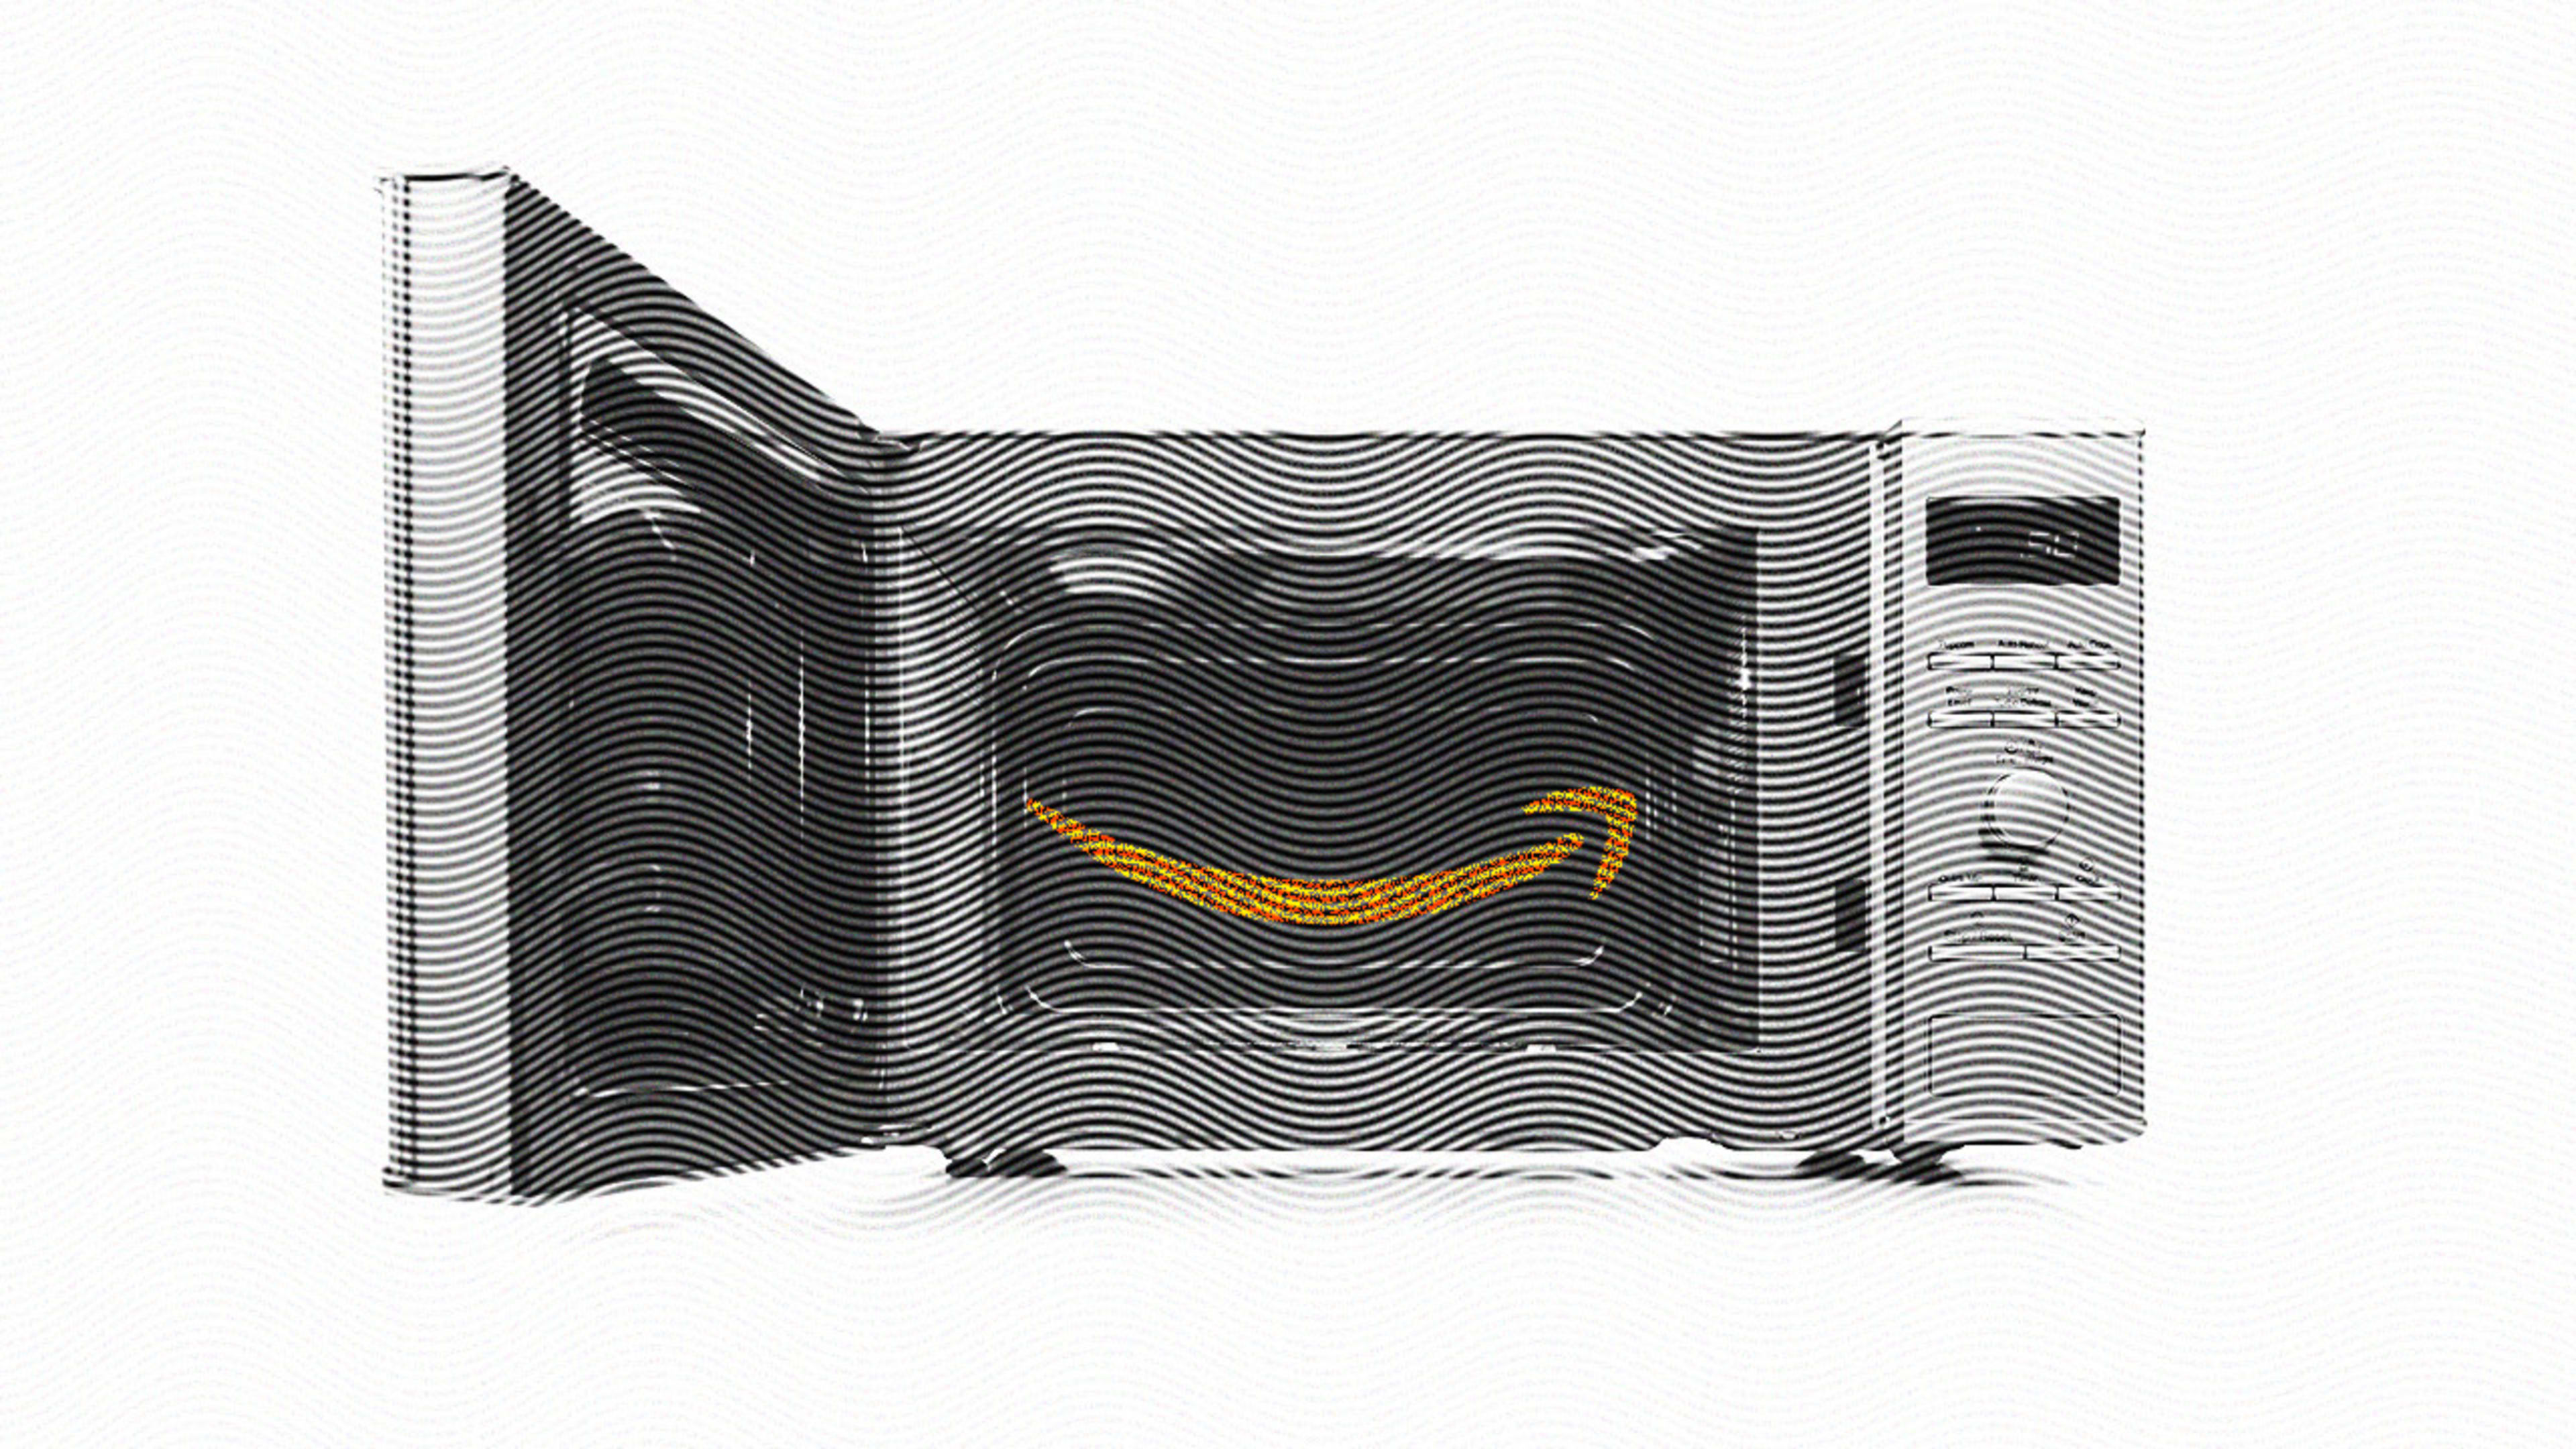 Amazon might put Alexa in a microwave oven